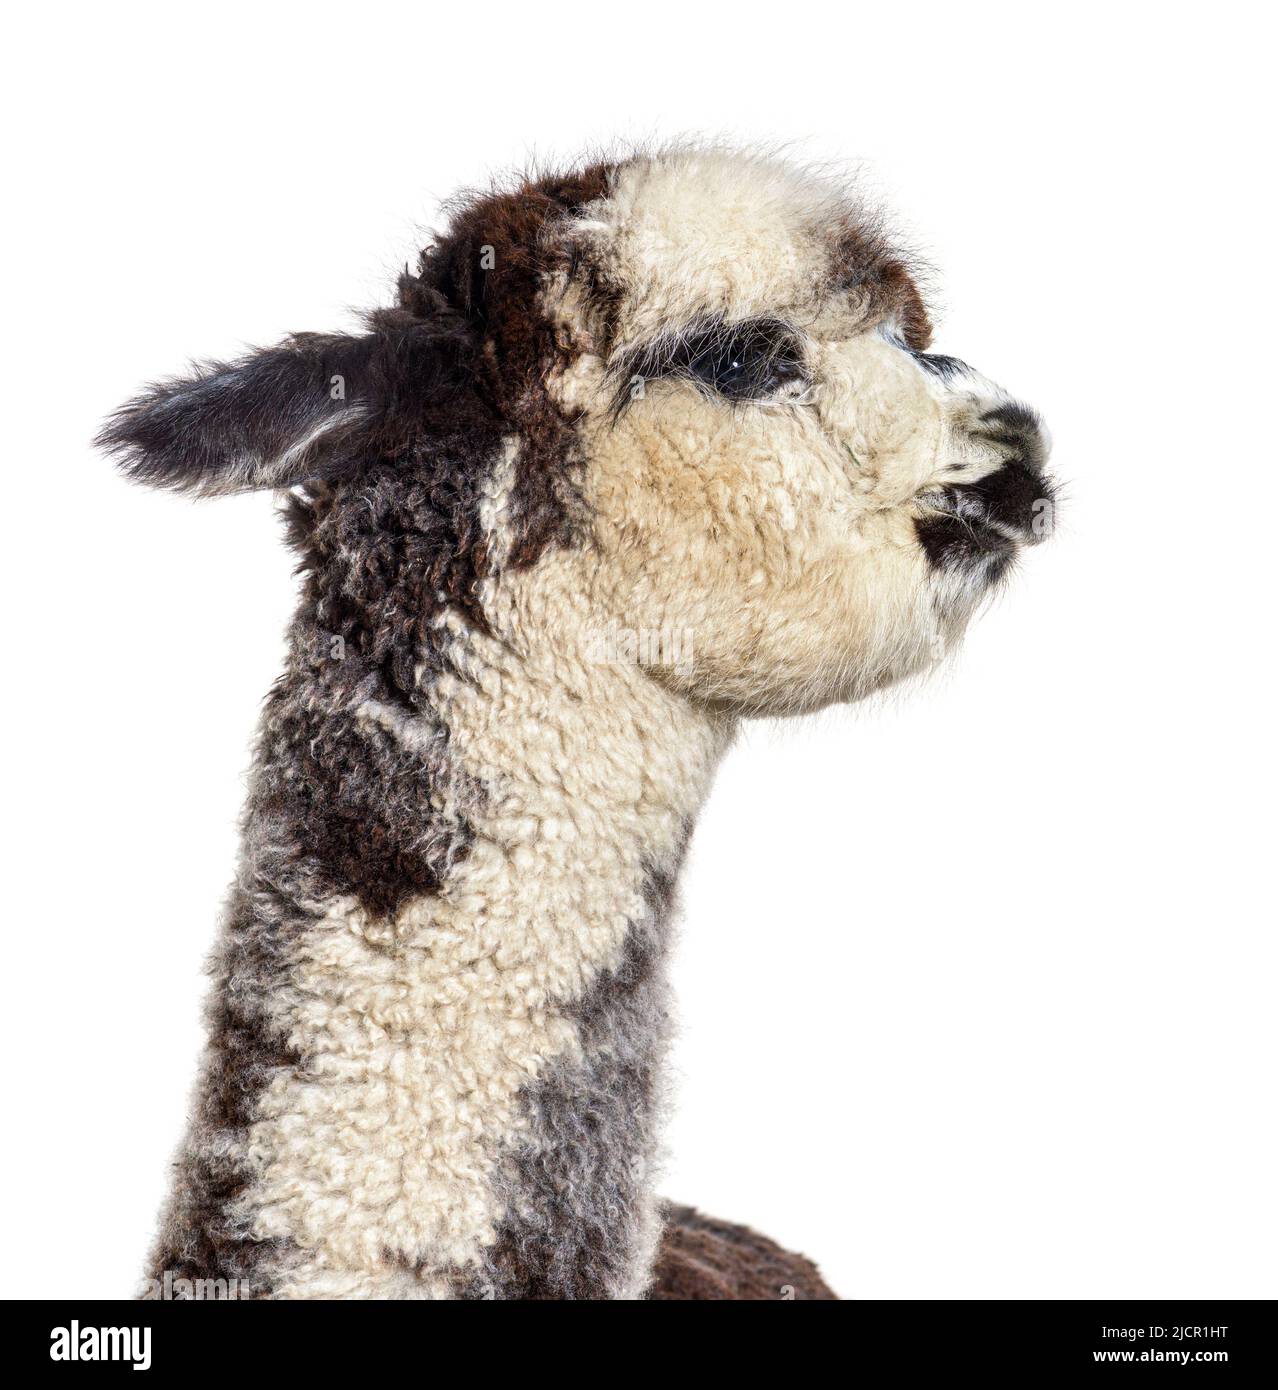 Rose grey young alpaca - Lama pacos, isoltaed on white Stock Photo